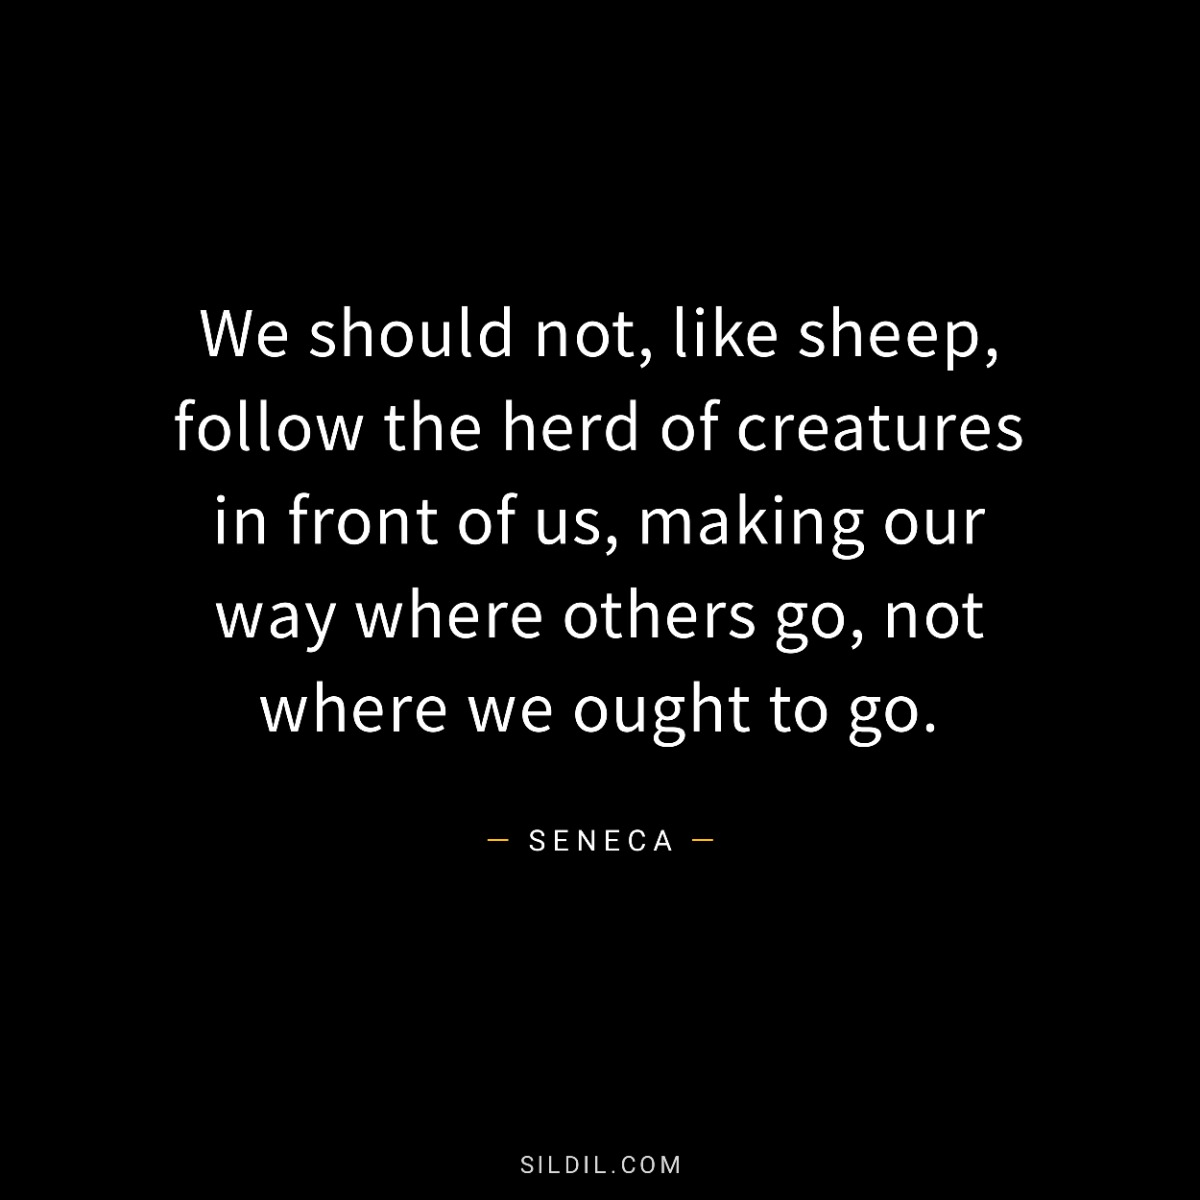 We should not, like sheep, follow the herd of creatures in front of us, making our way where others go, not where we ought to go.